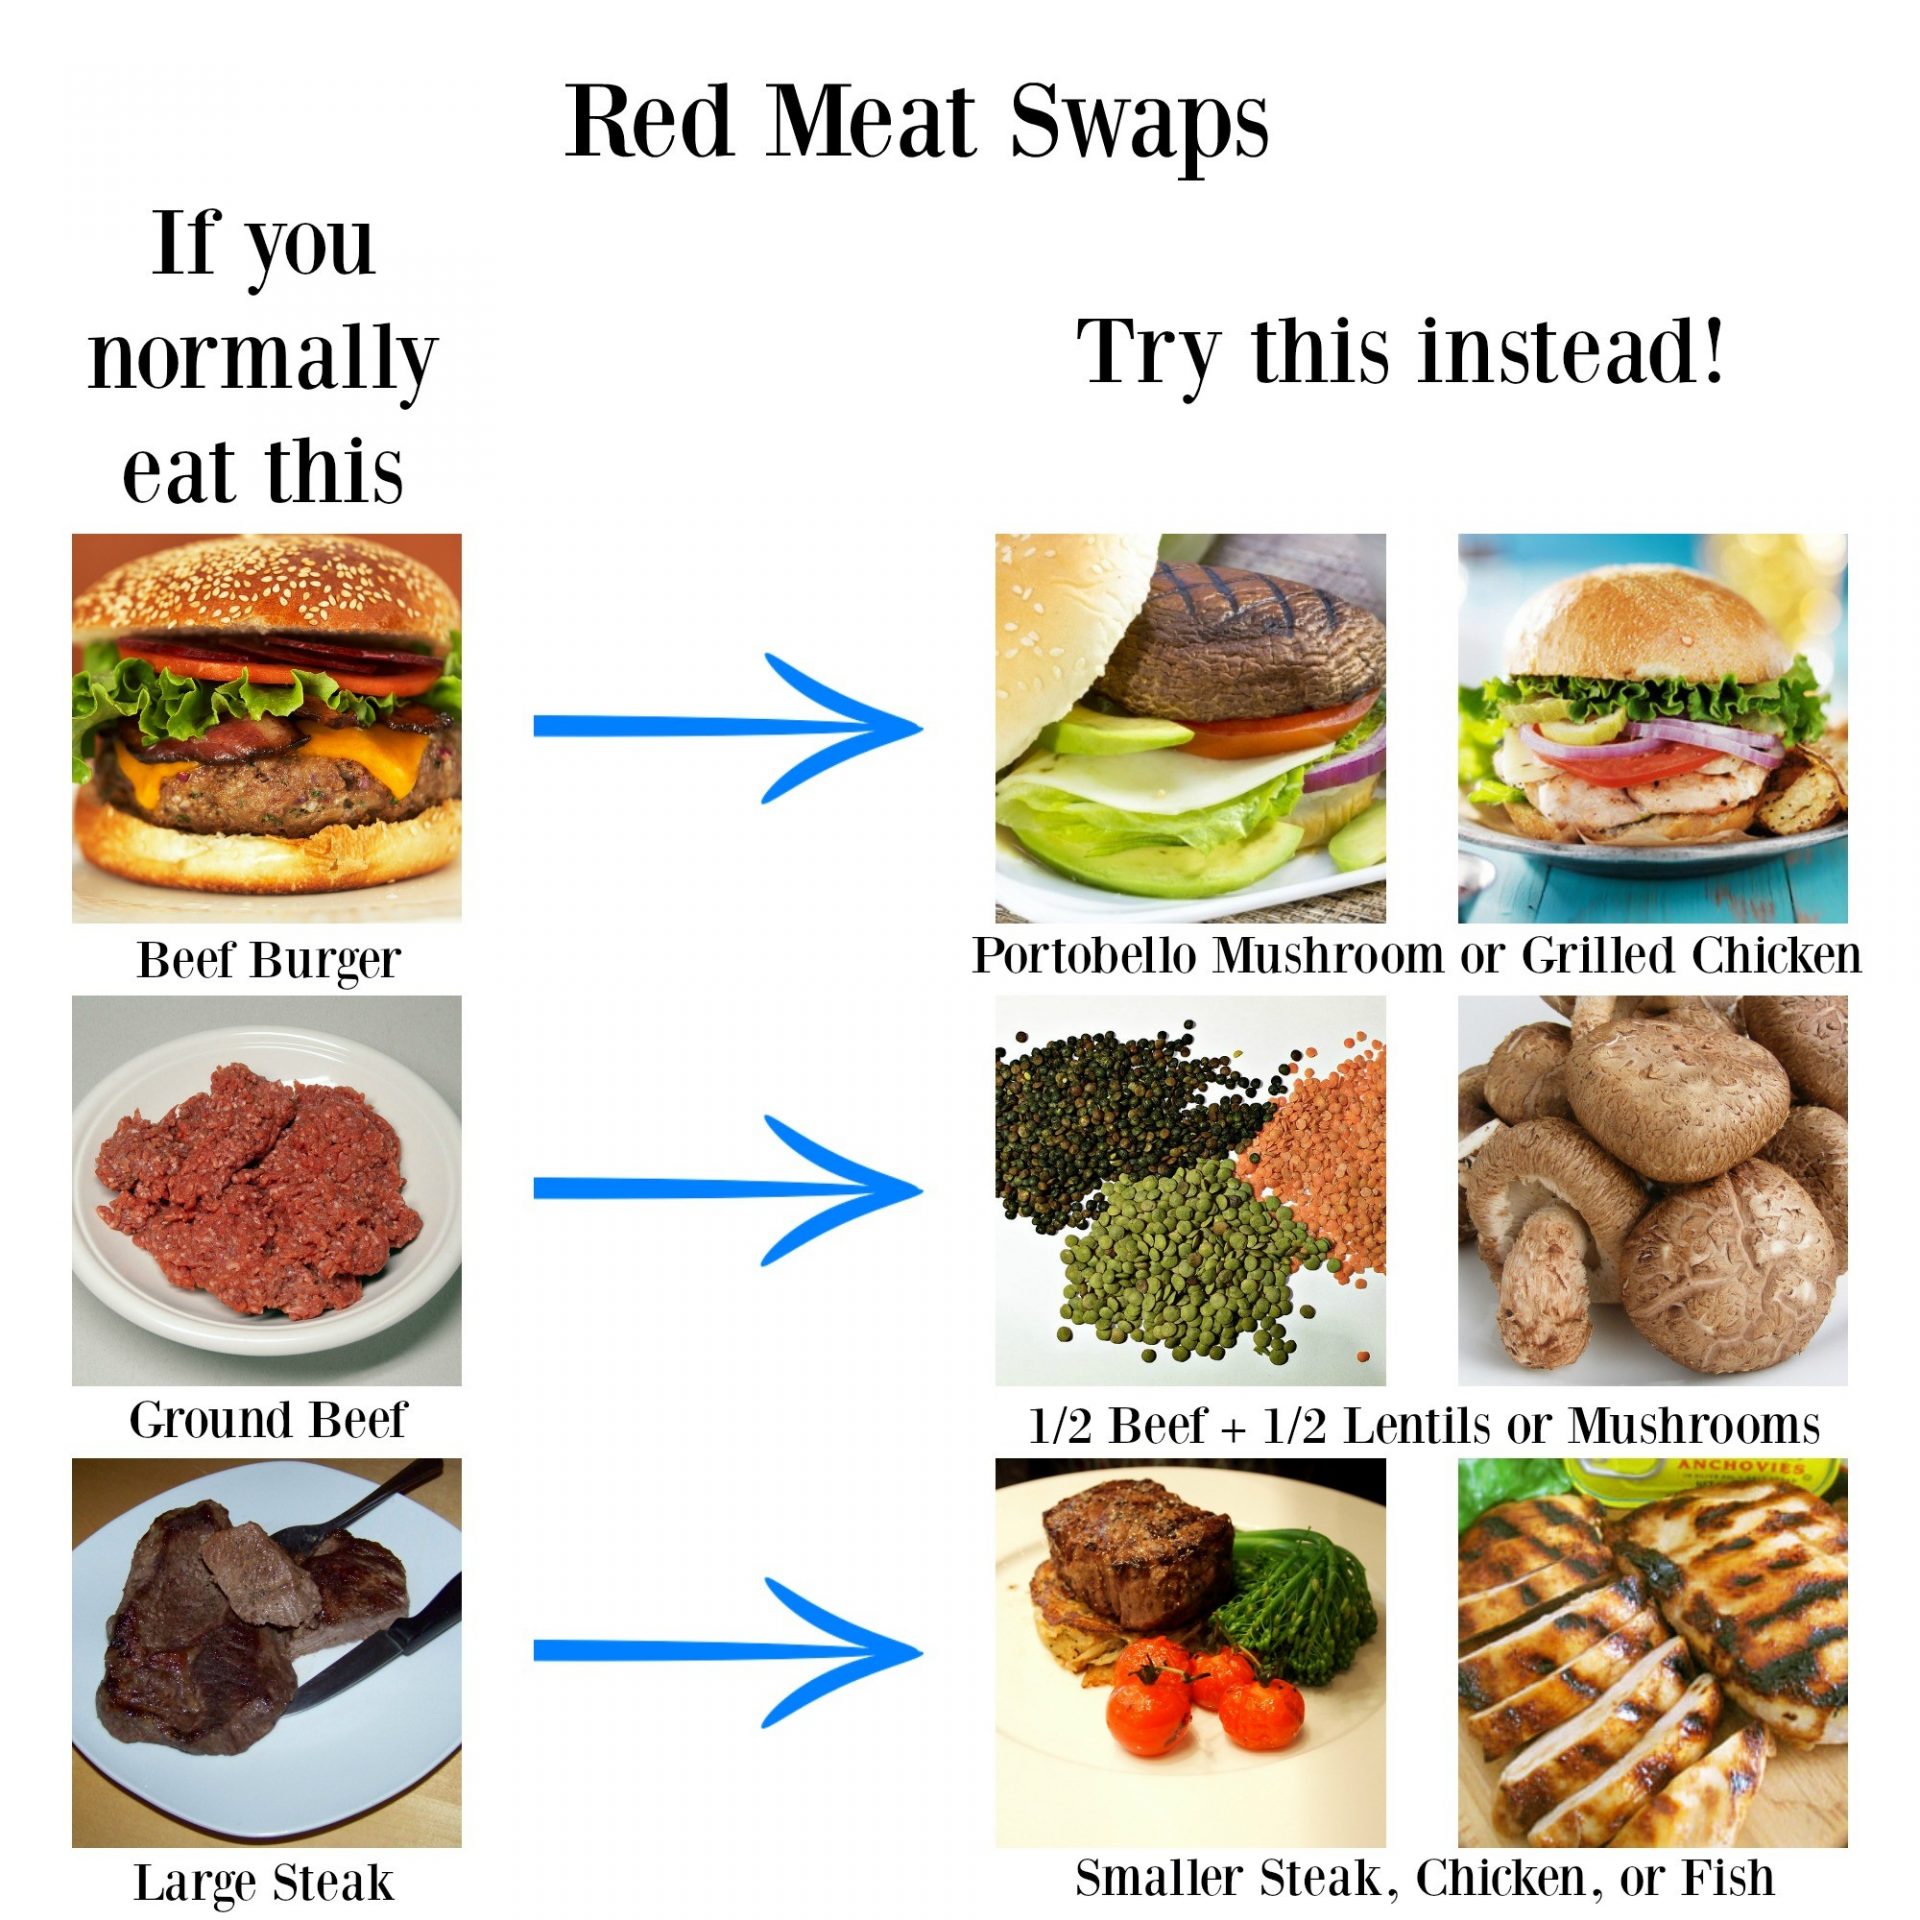 Red meat swaps